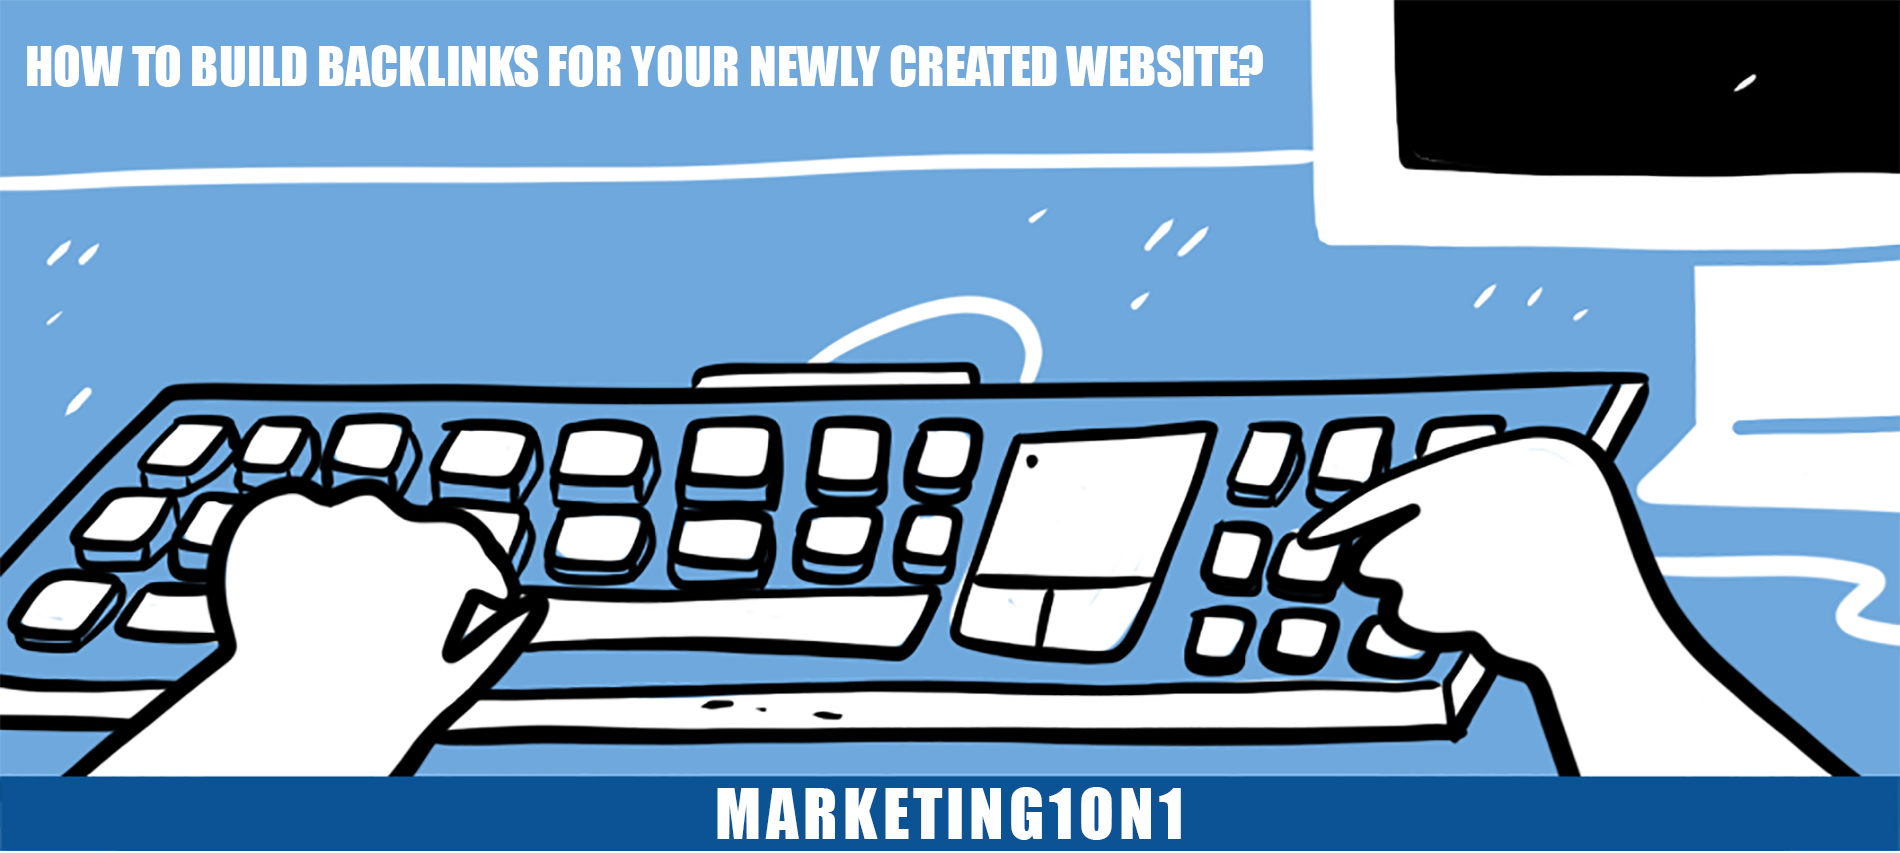 How to build backlinks for your newly created website?